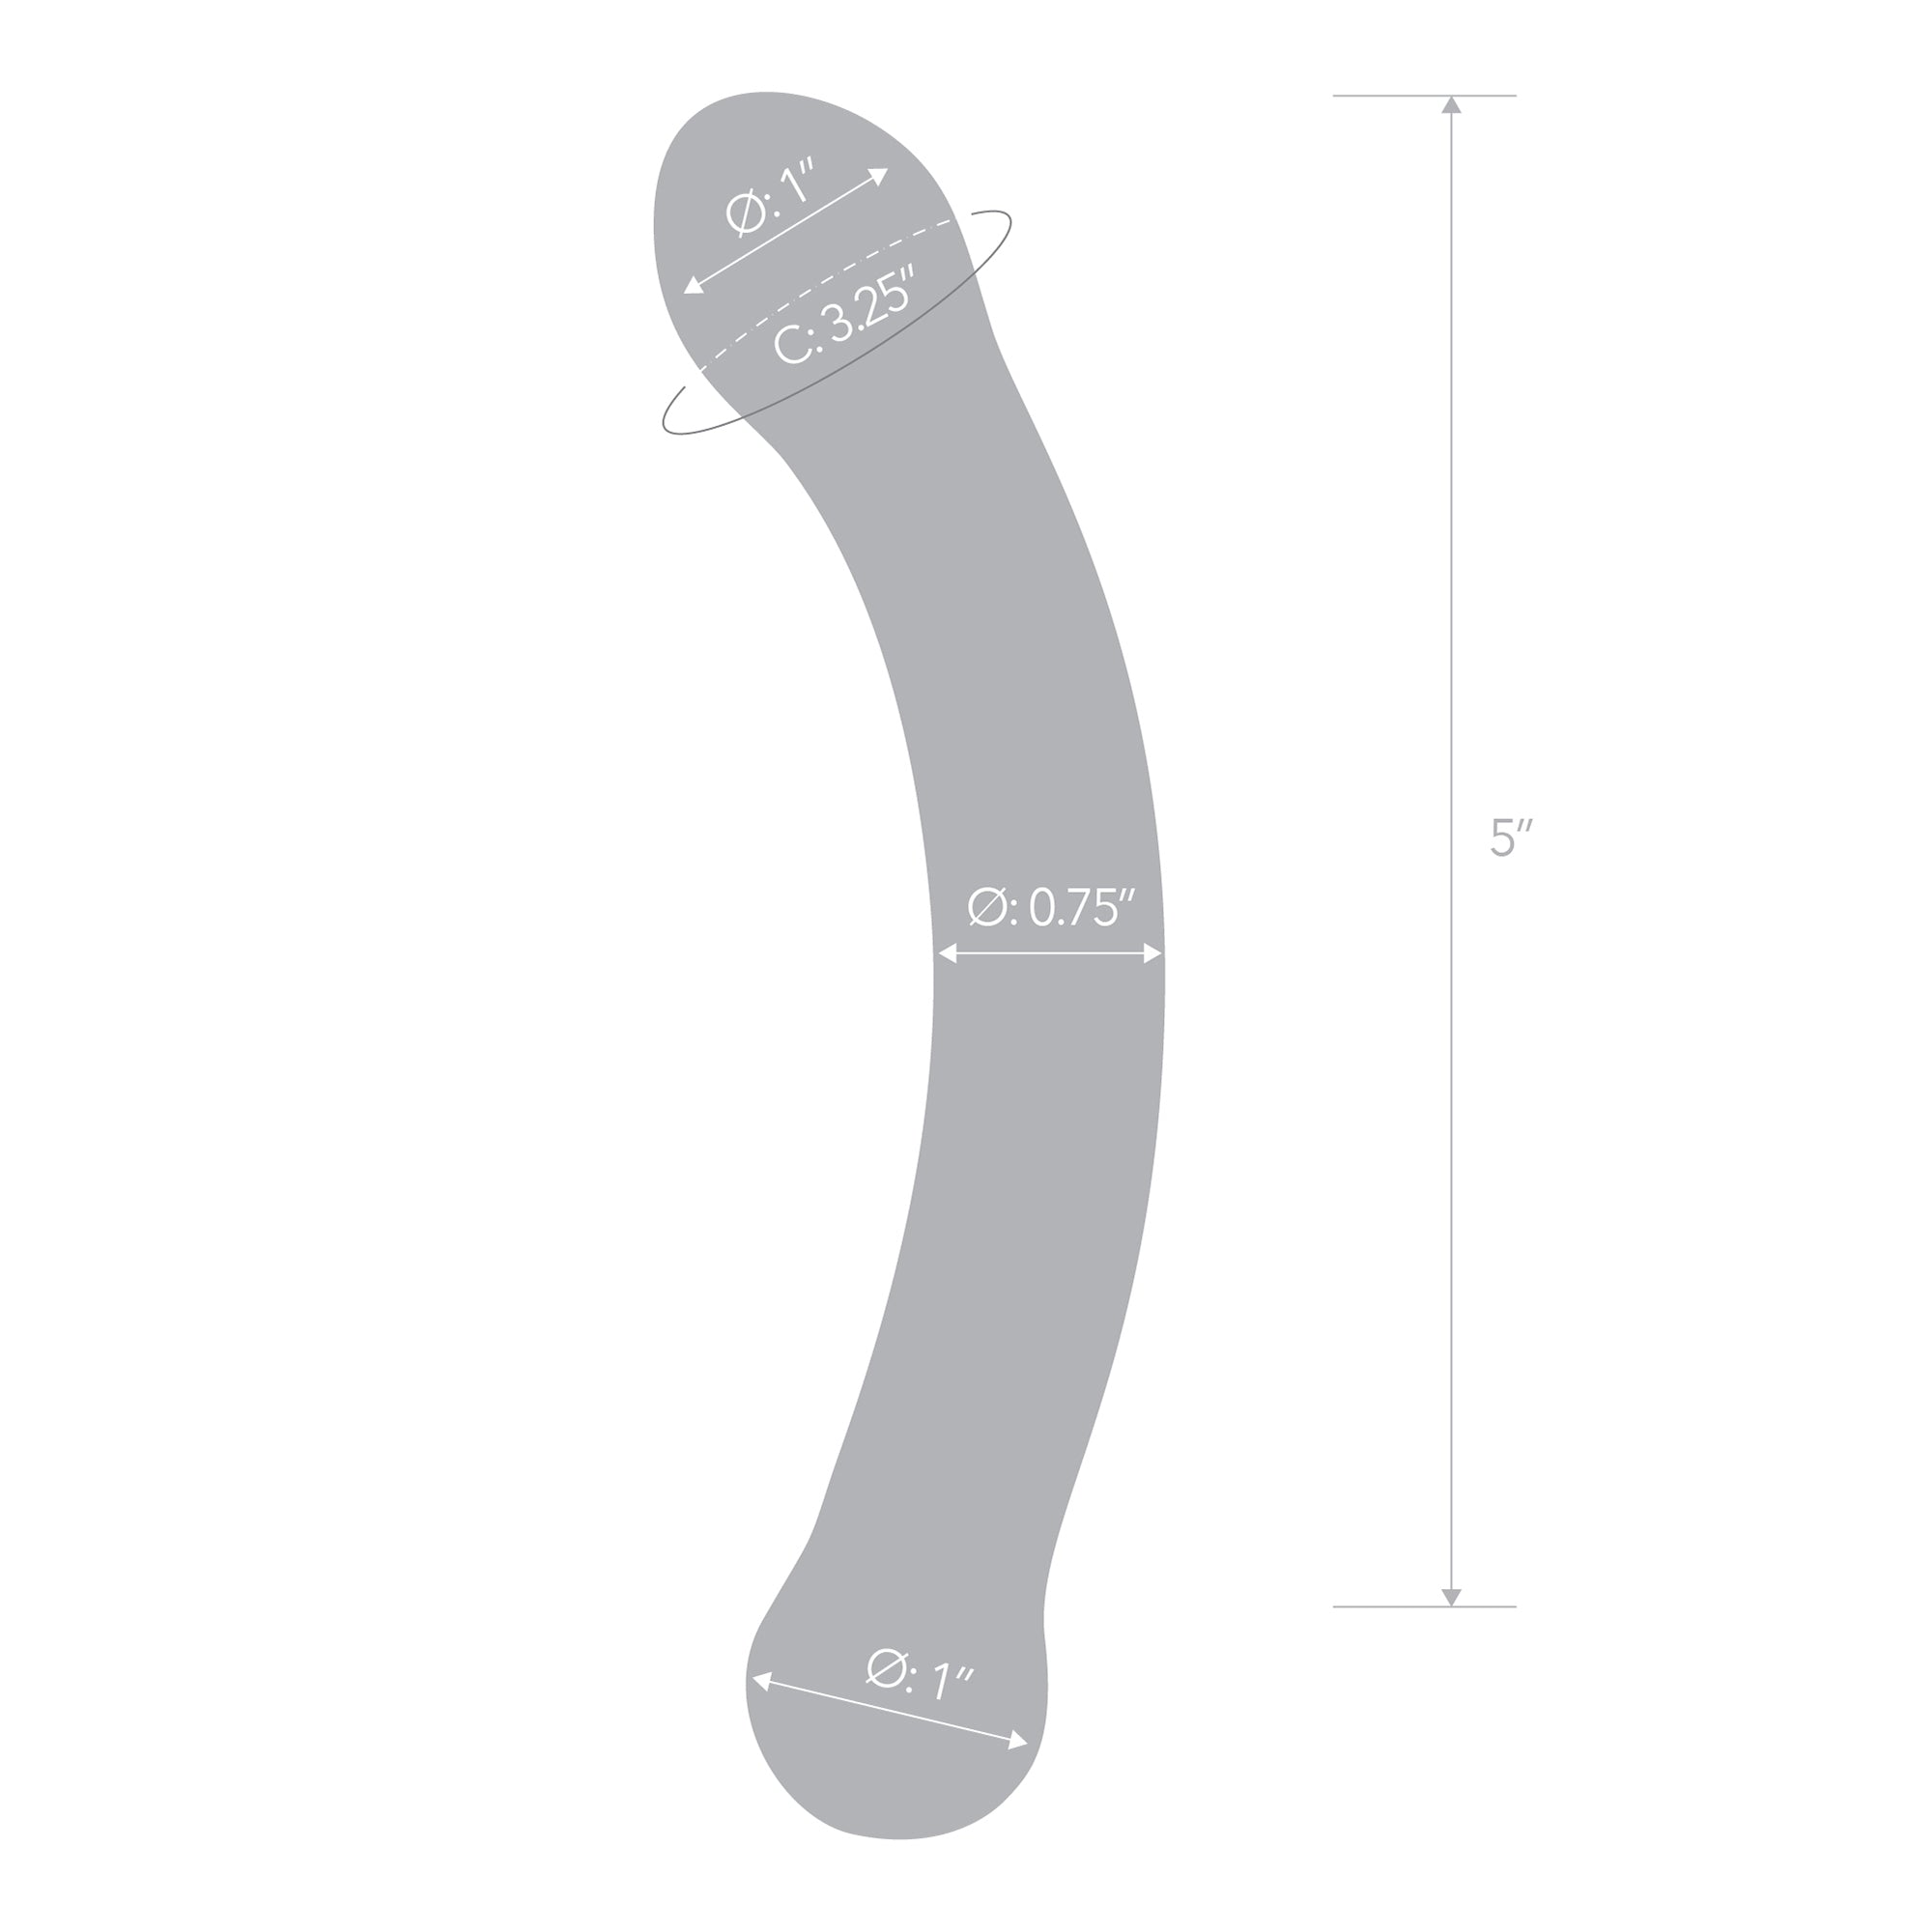 Specifications of the Gläs 6 inch Curved G-spot Blue Glass Dildo